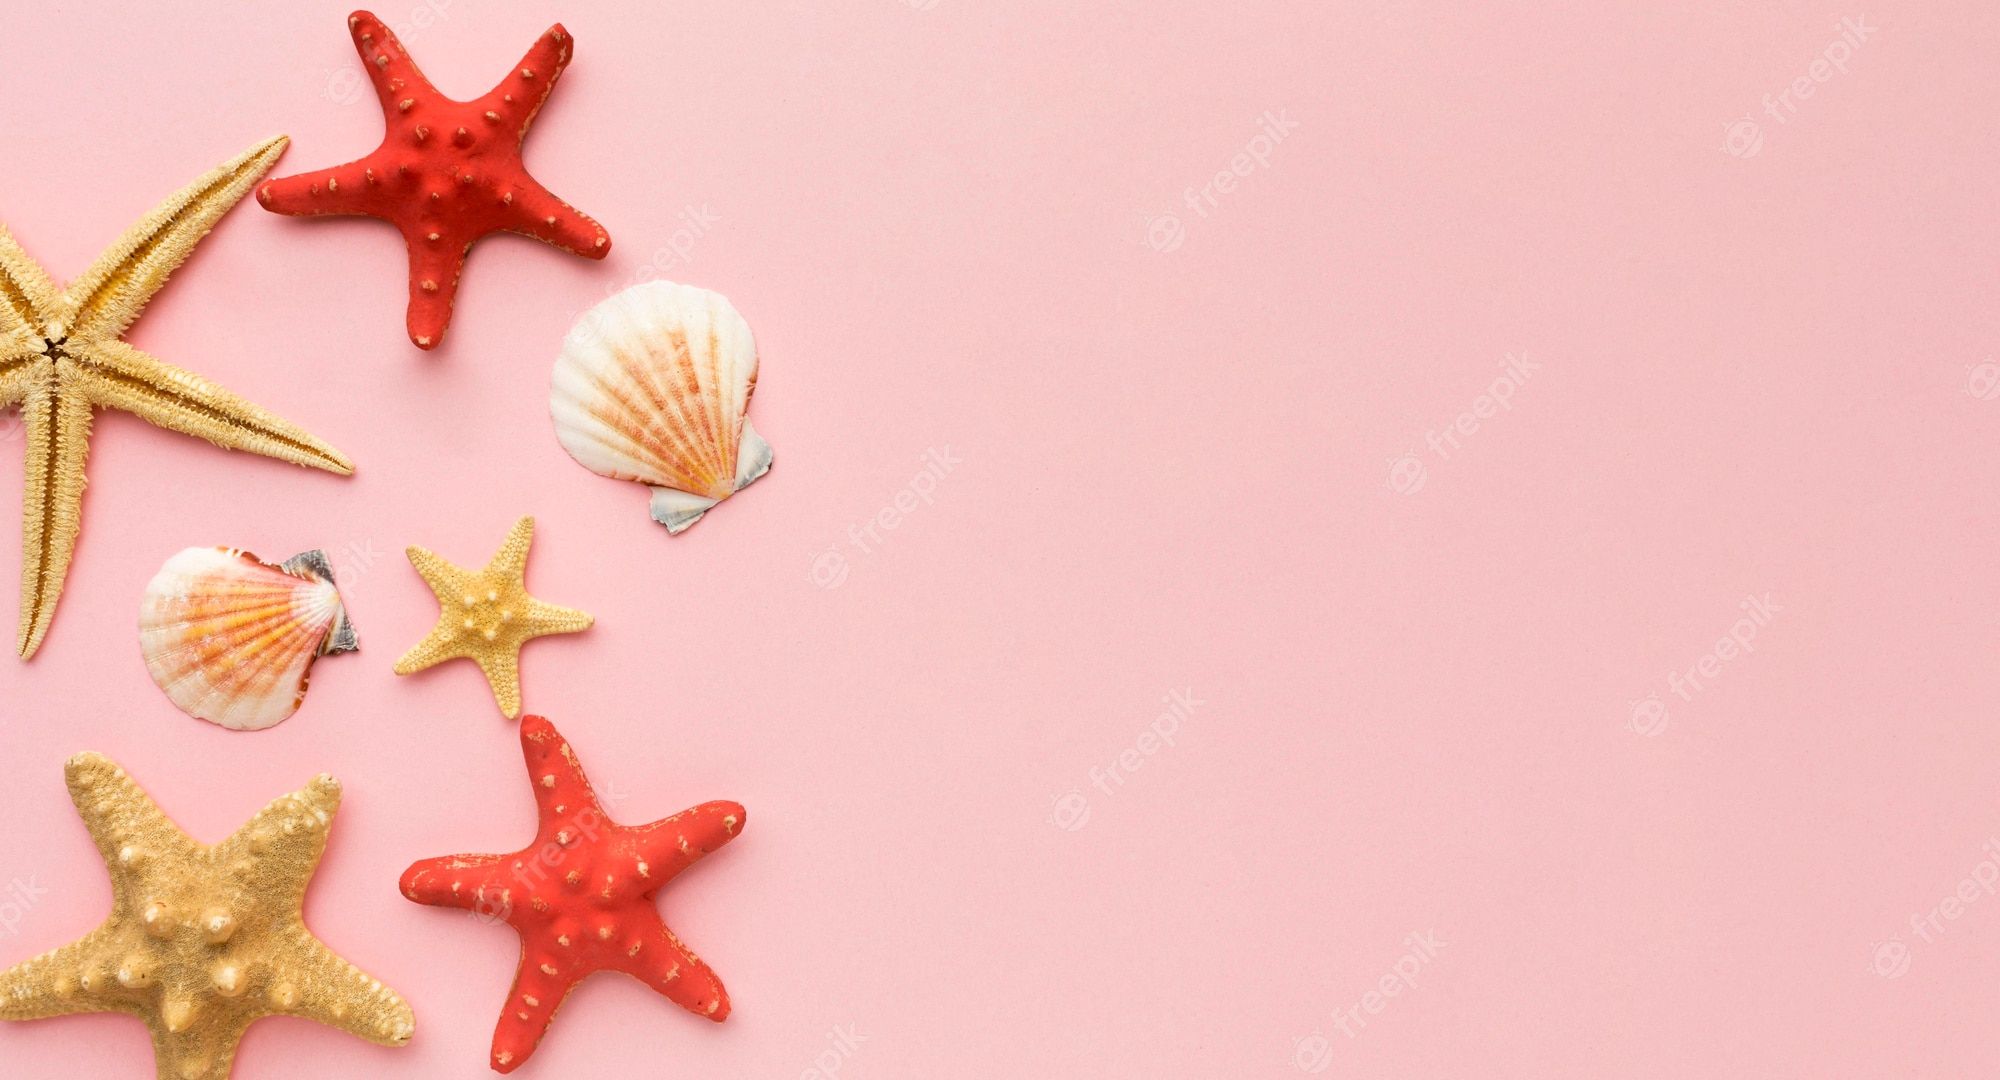 A collection of starfish and shells on pink background - Starfish